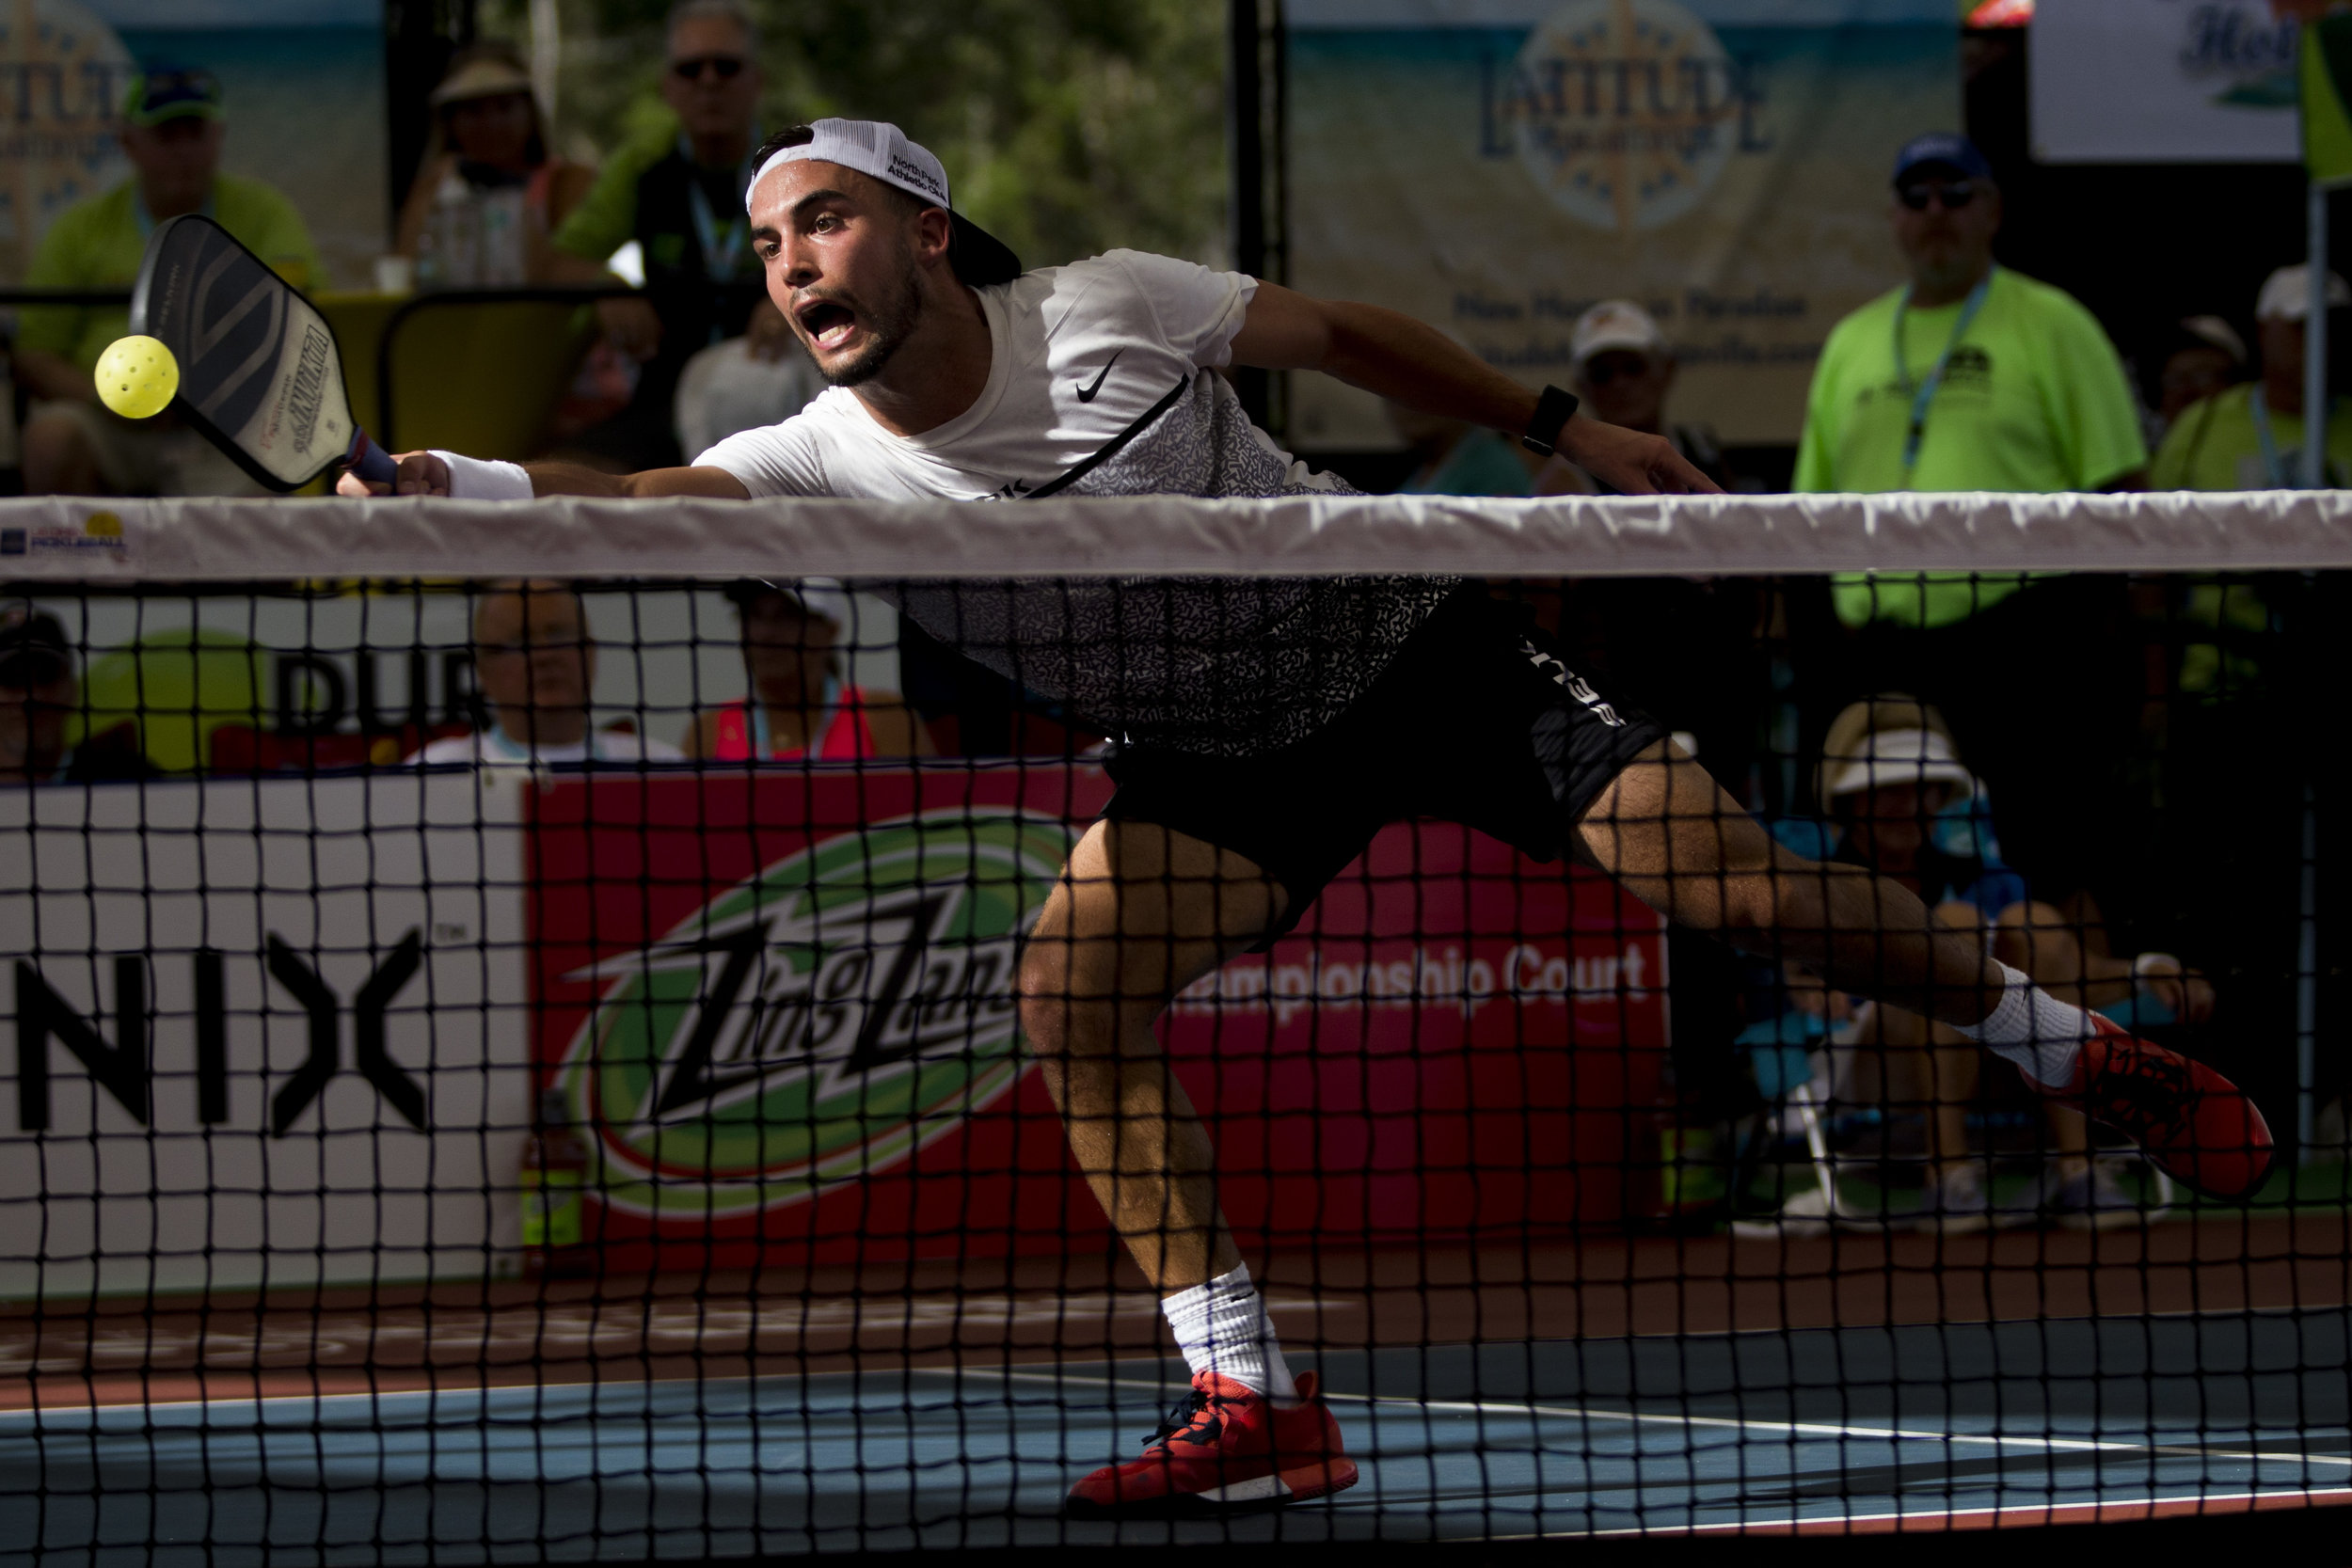  Tyson McGuffin during the men's Pro division Pickleball Championship match during the first day of the 2018 U.S. Open Pickleball Championships at East Naples Community Park Sunday, April 22, 2018 in Naples. McGuffin would defeat Fort Myers local Kyl